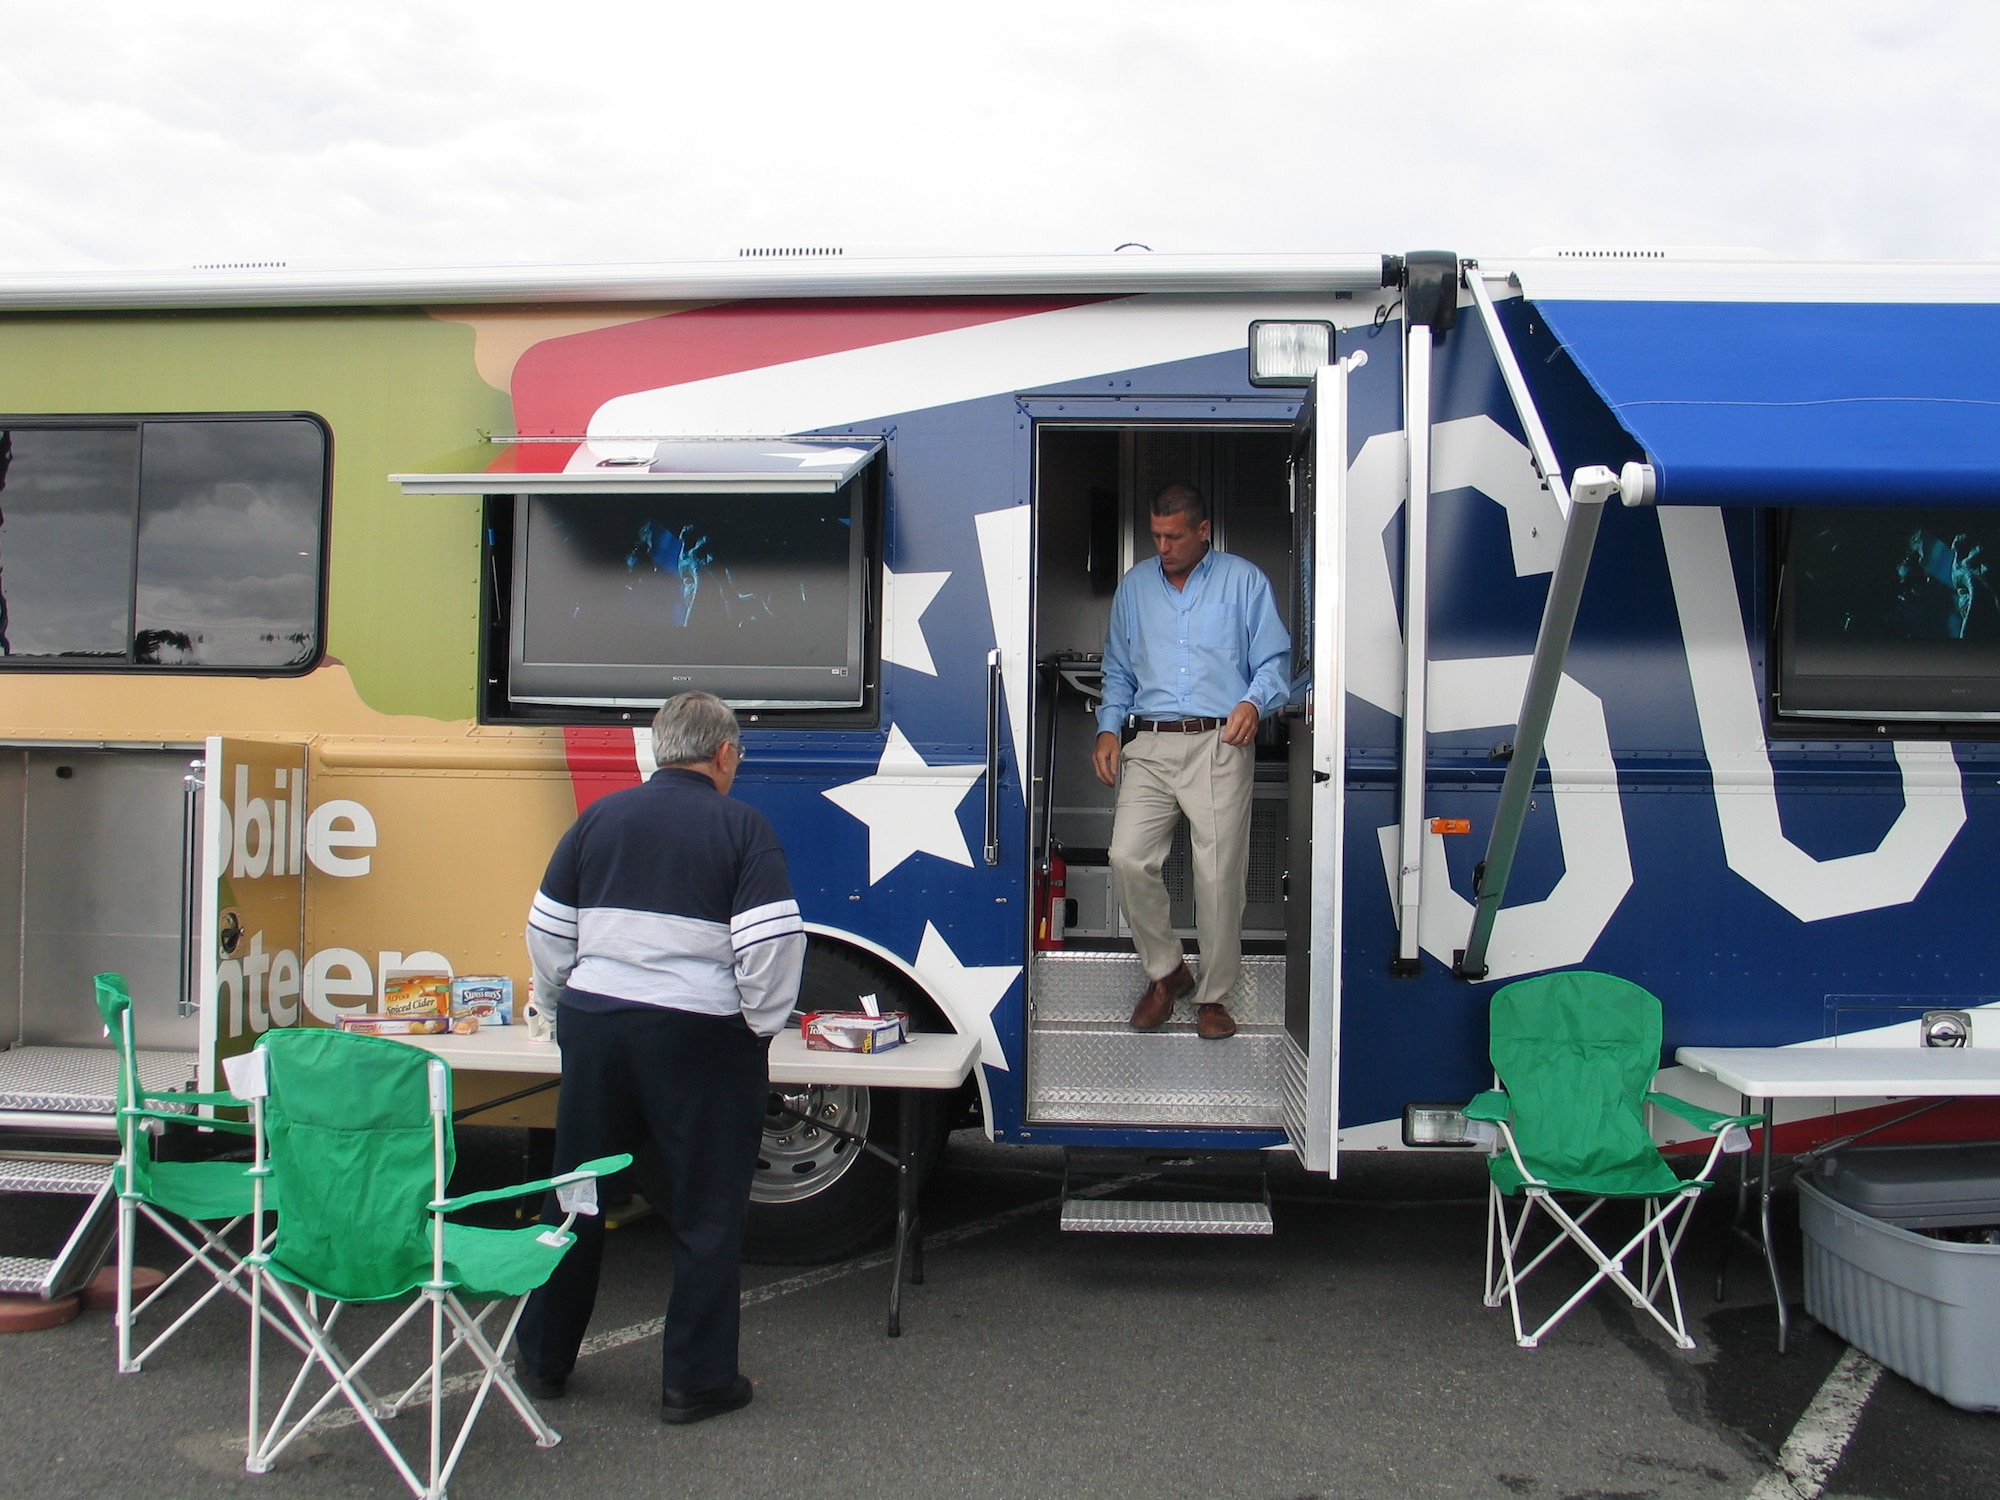 FAIRCHILD AIR FORCE BASE, Wash. -- Corey Hulse, United Services Organization, helps a customer at the USO mobile canteen at the BX parking lot June 5. The canteen is designed to bring USO programs directly to stateside servicemembers. There are ten mobile canteens worldwide; three of those are dedicated to the United States. (U.S. Air Force photo/Staff Sgt. Connie L. Bias)
